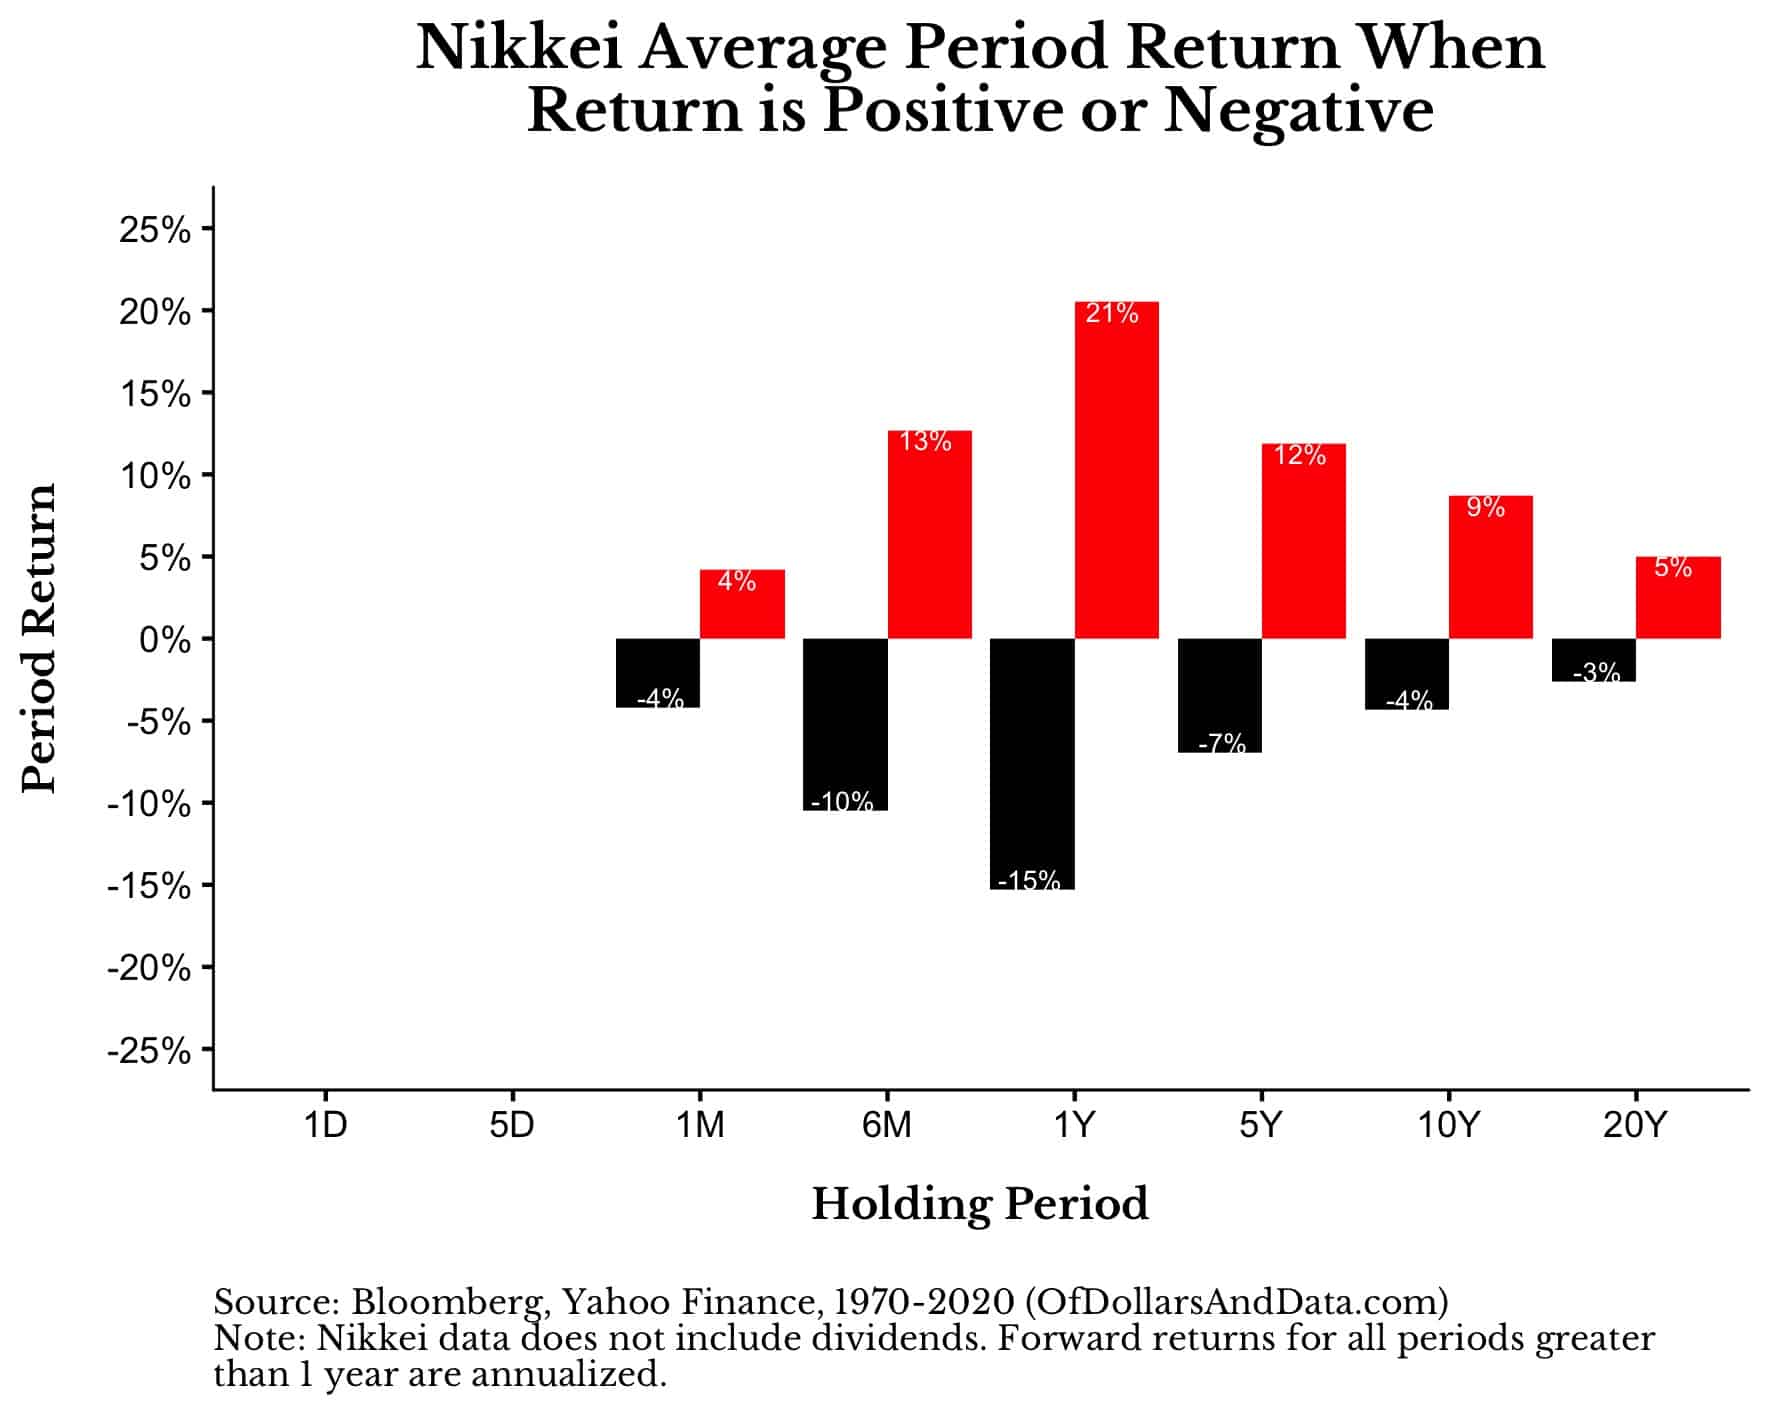 Nikkei period return when return is positive or negative